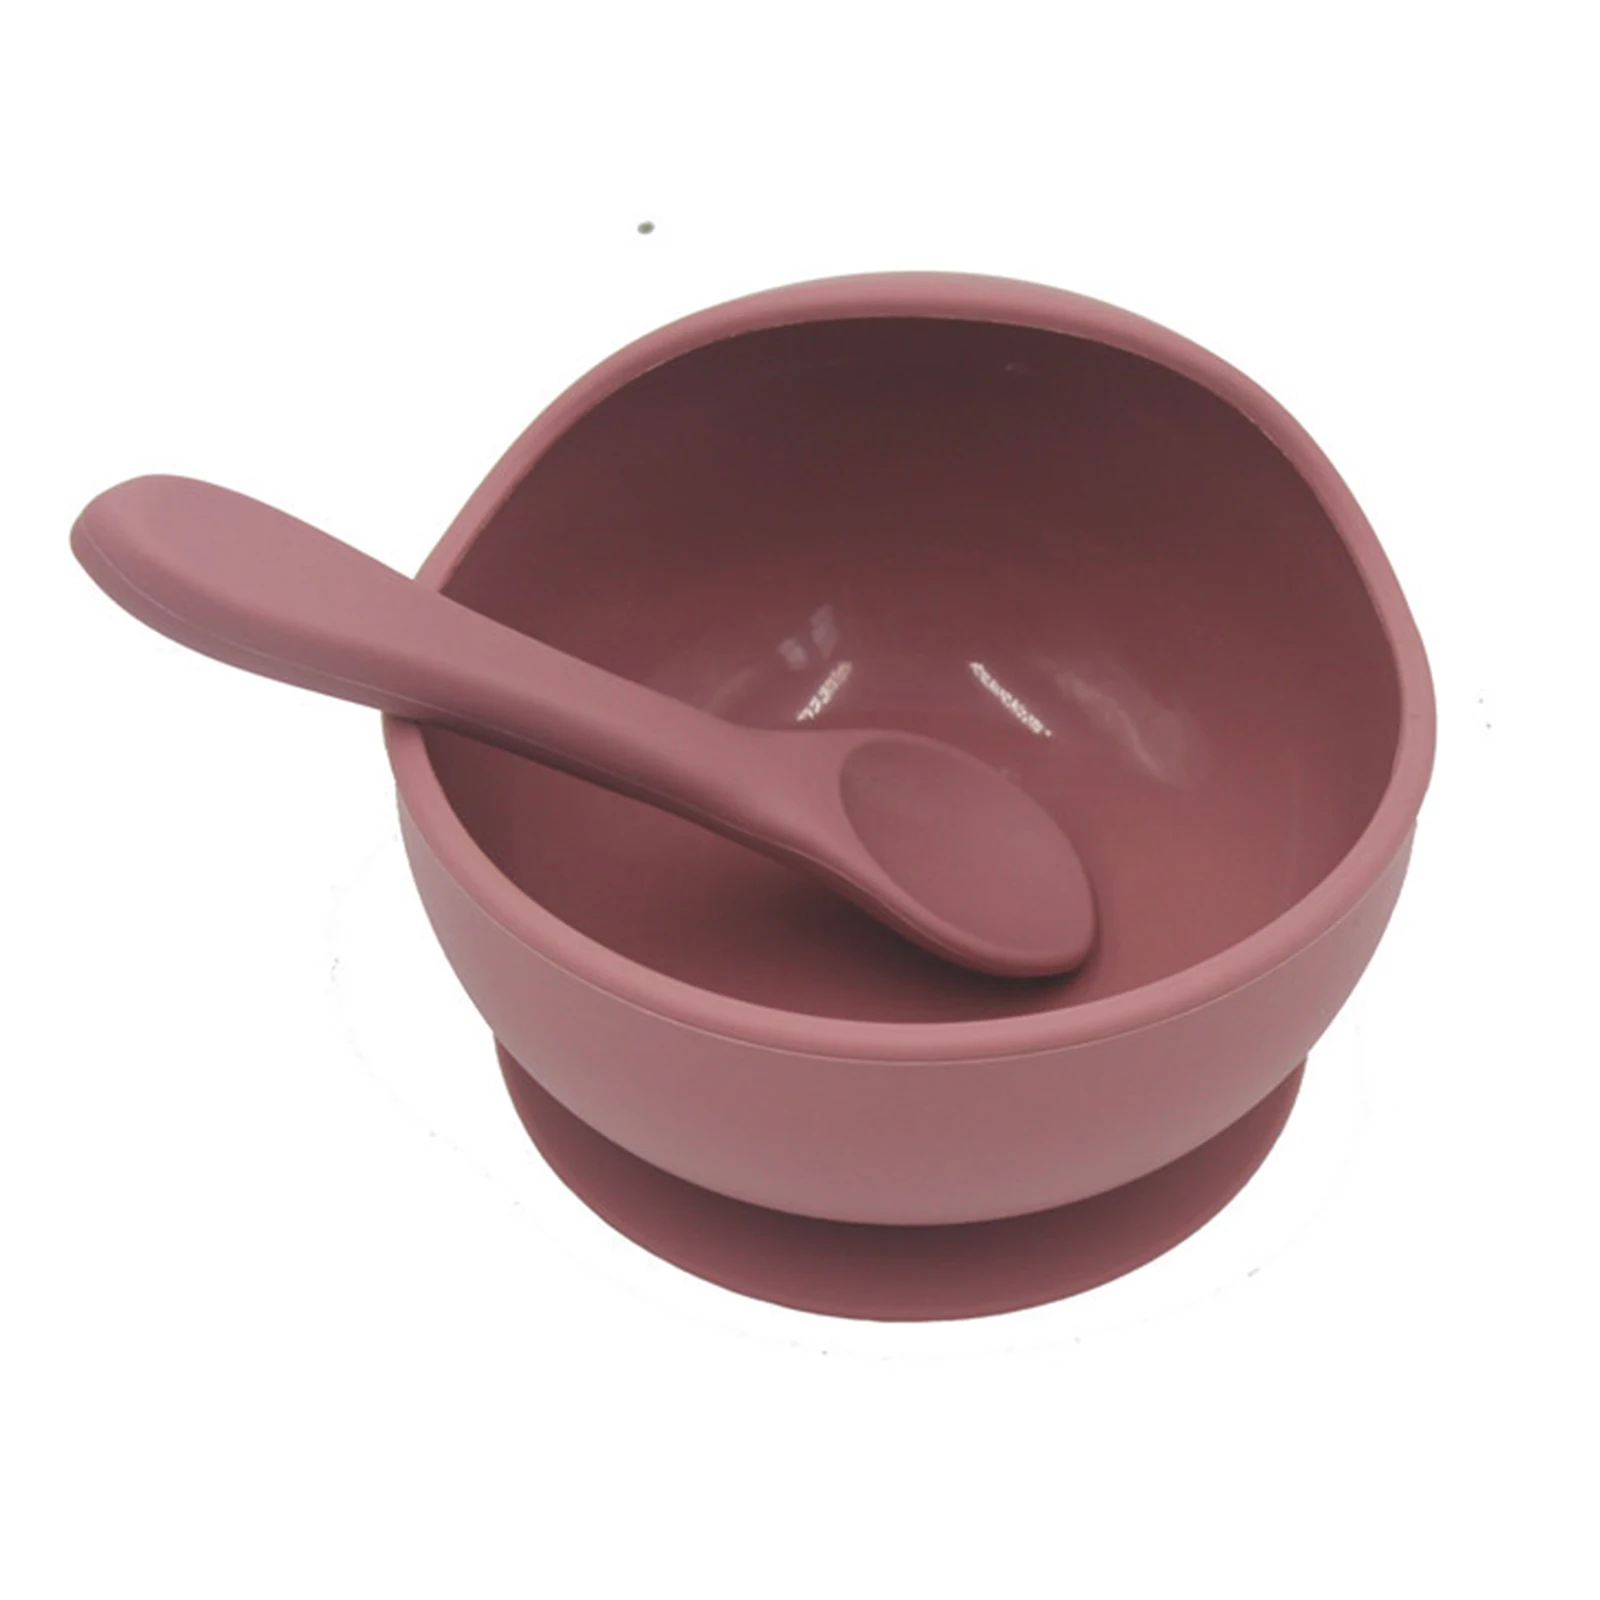 USSE Hot Selling BPA Free 1set Feeding Colour Kids and Babies Learning Dishes Non-Slip  Silicone Suction Bowl & Spoon Set